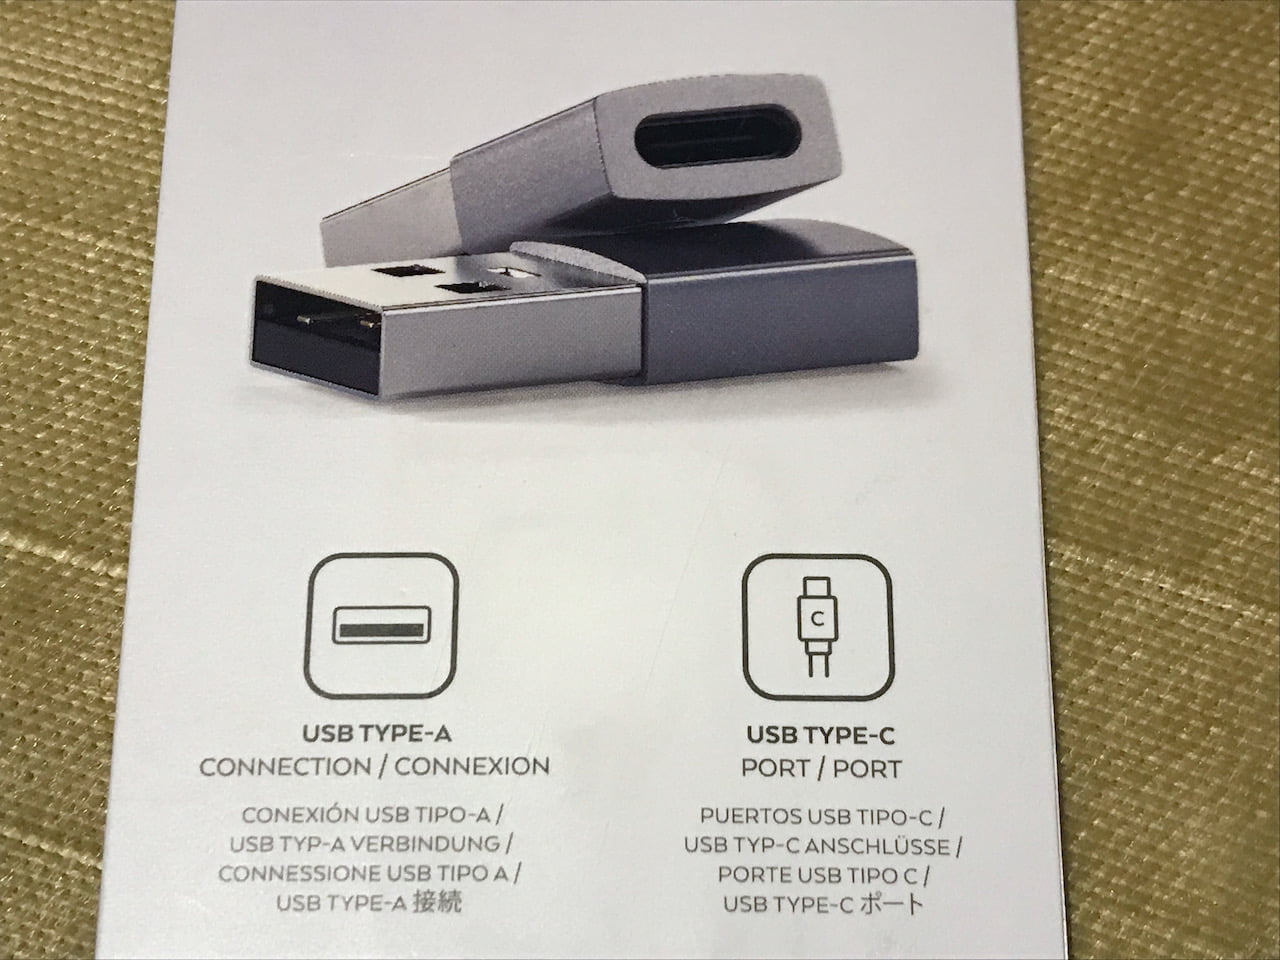 Satechi USB A to USB C Adapter back